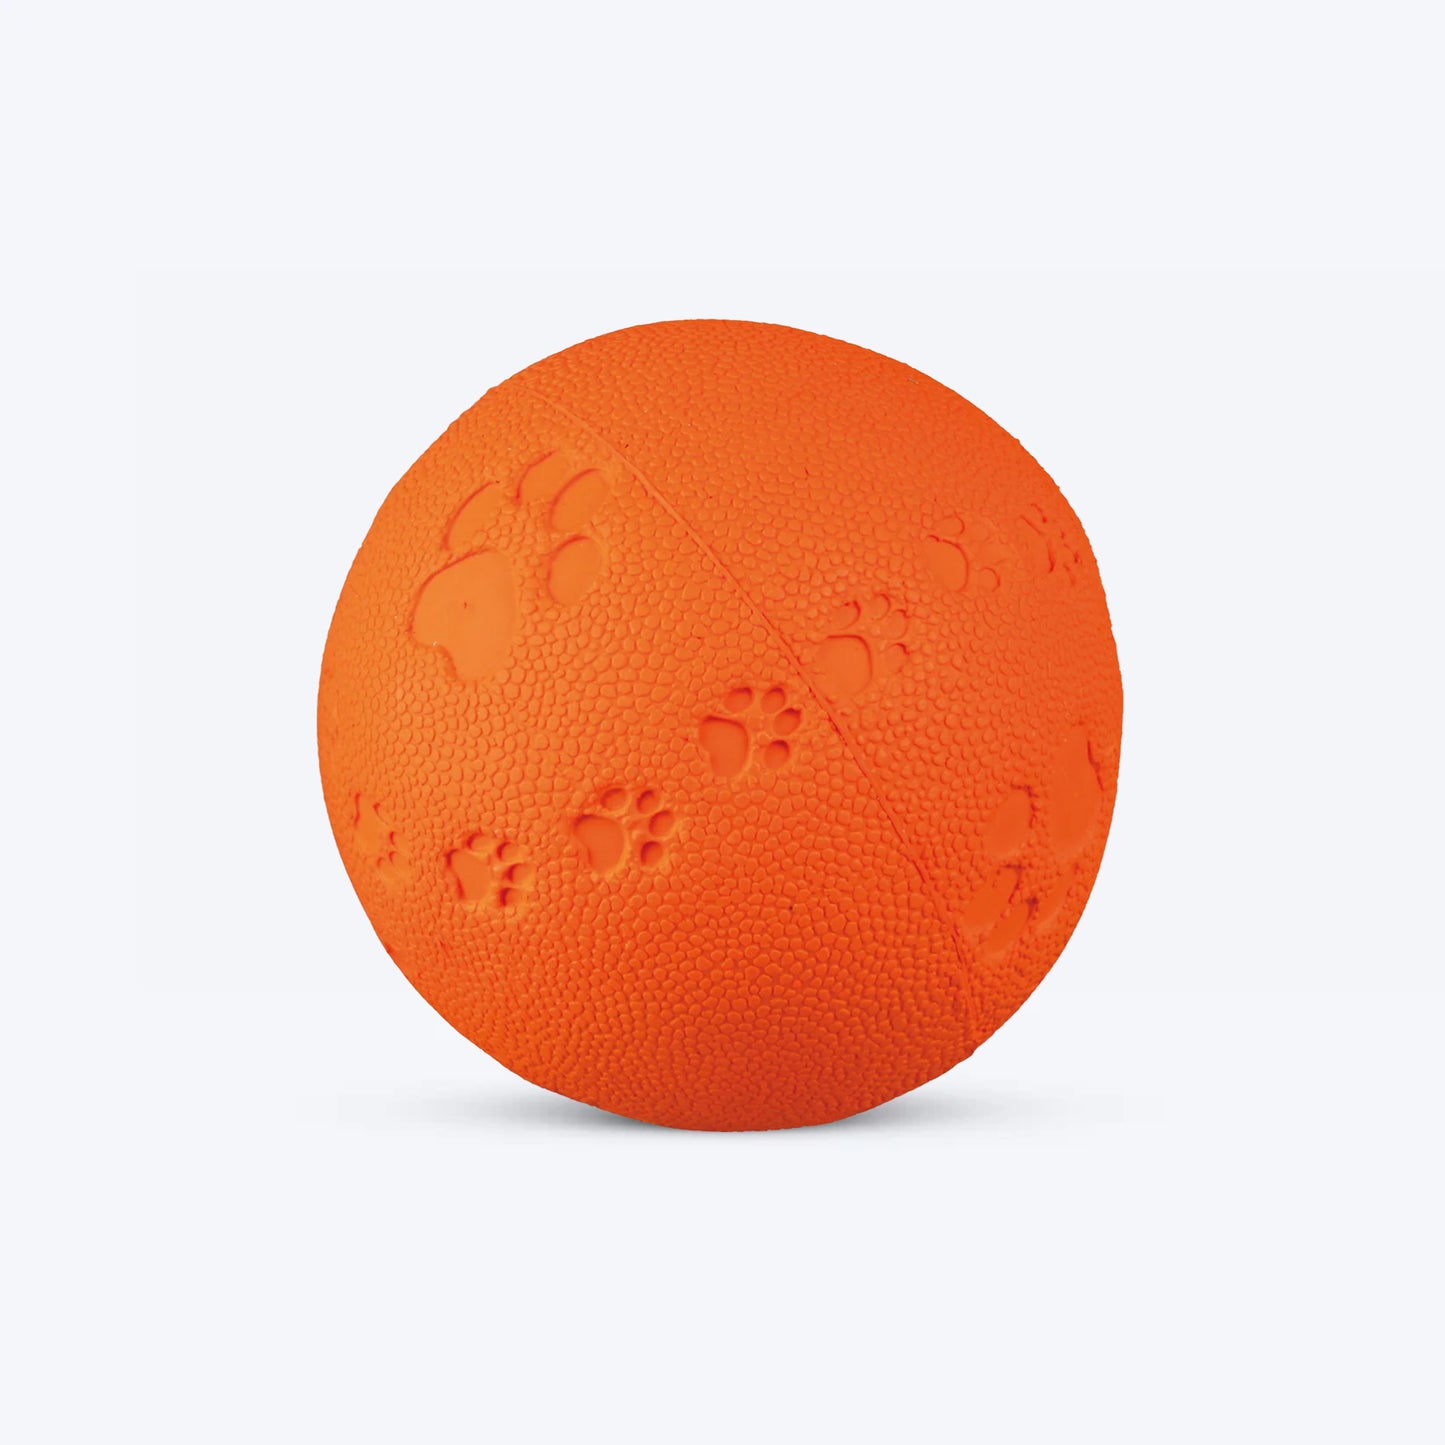 Trixie Natural Rubber Bouncy Ball Chew Toy for Dogs - Heads Up For Tails